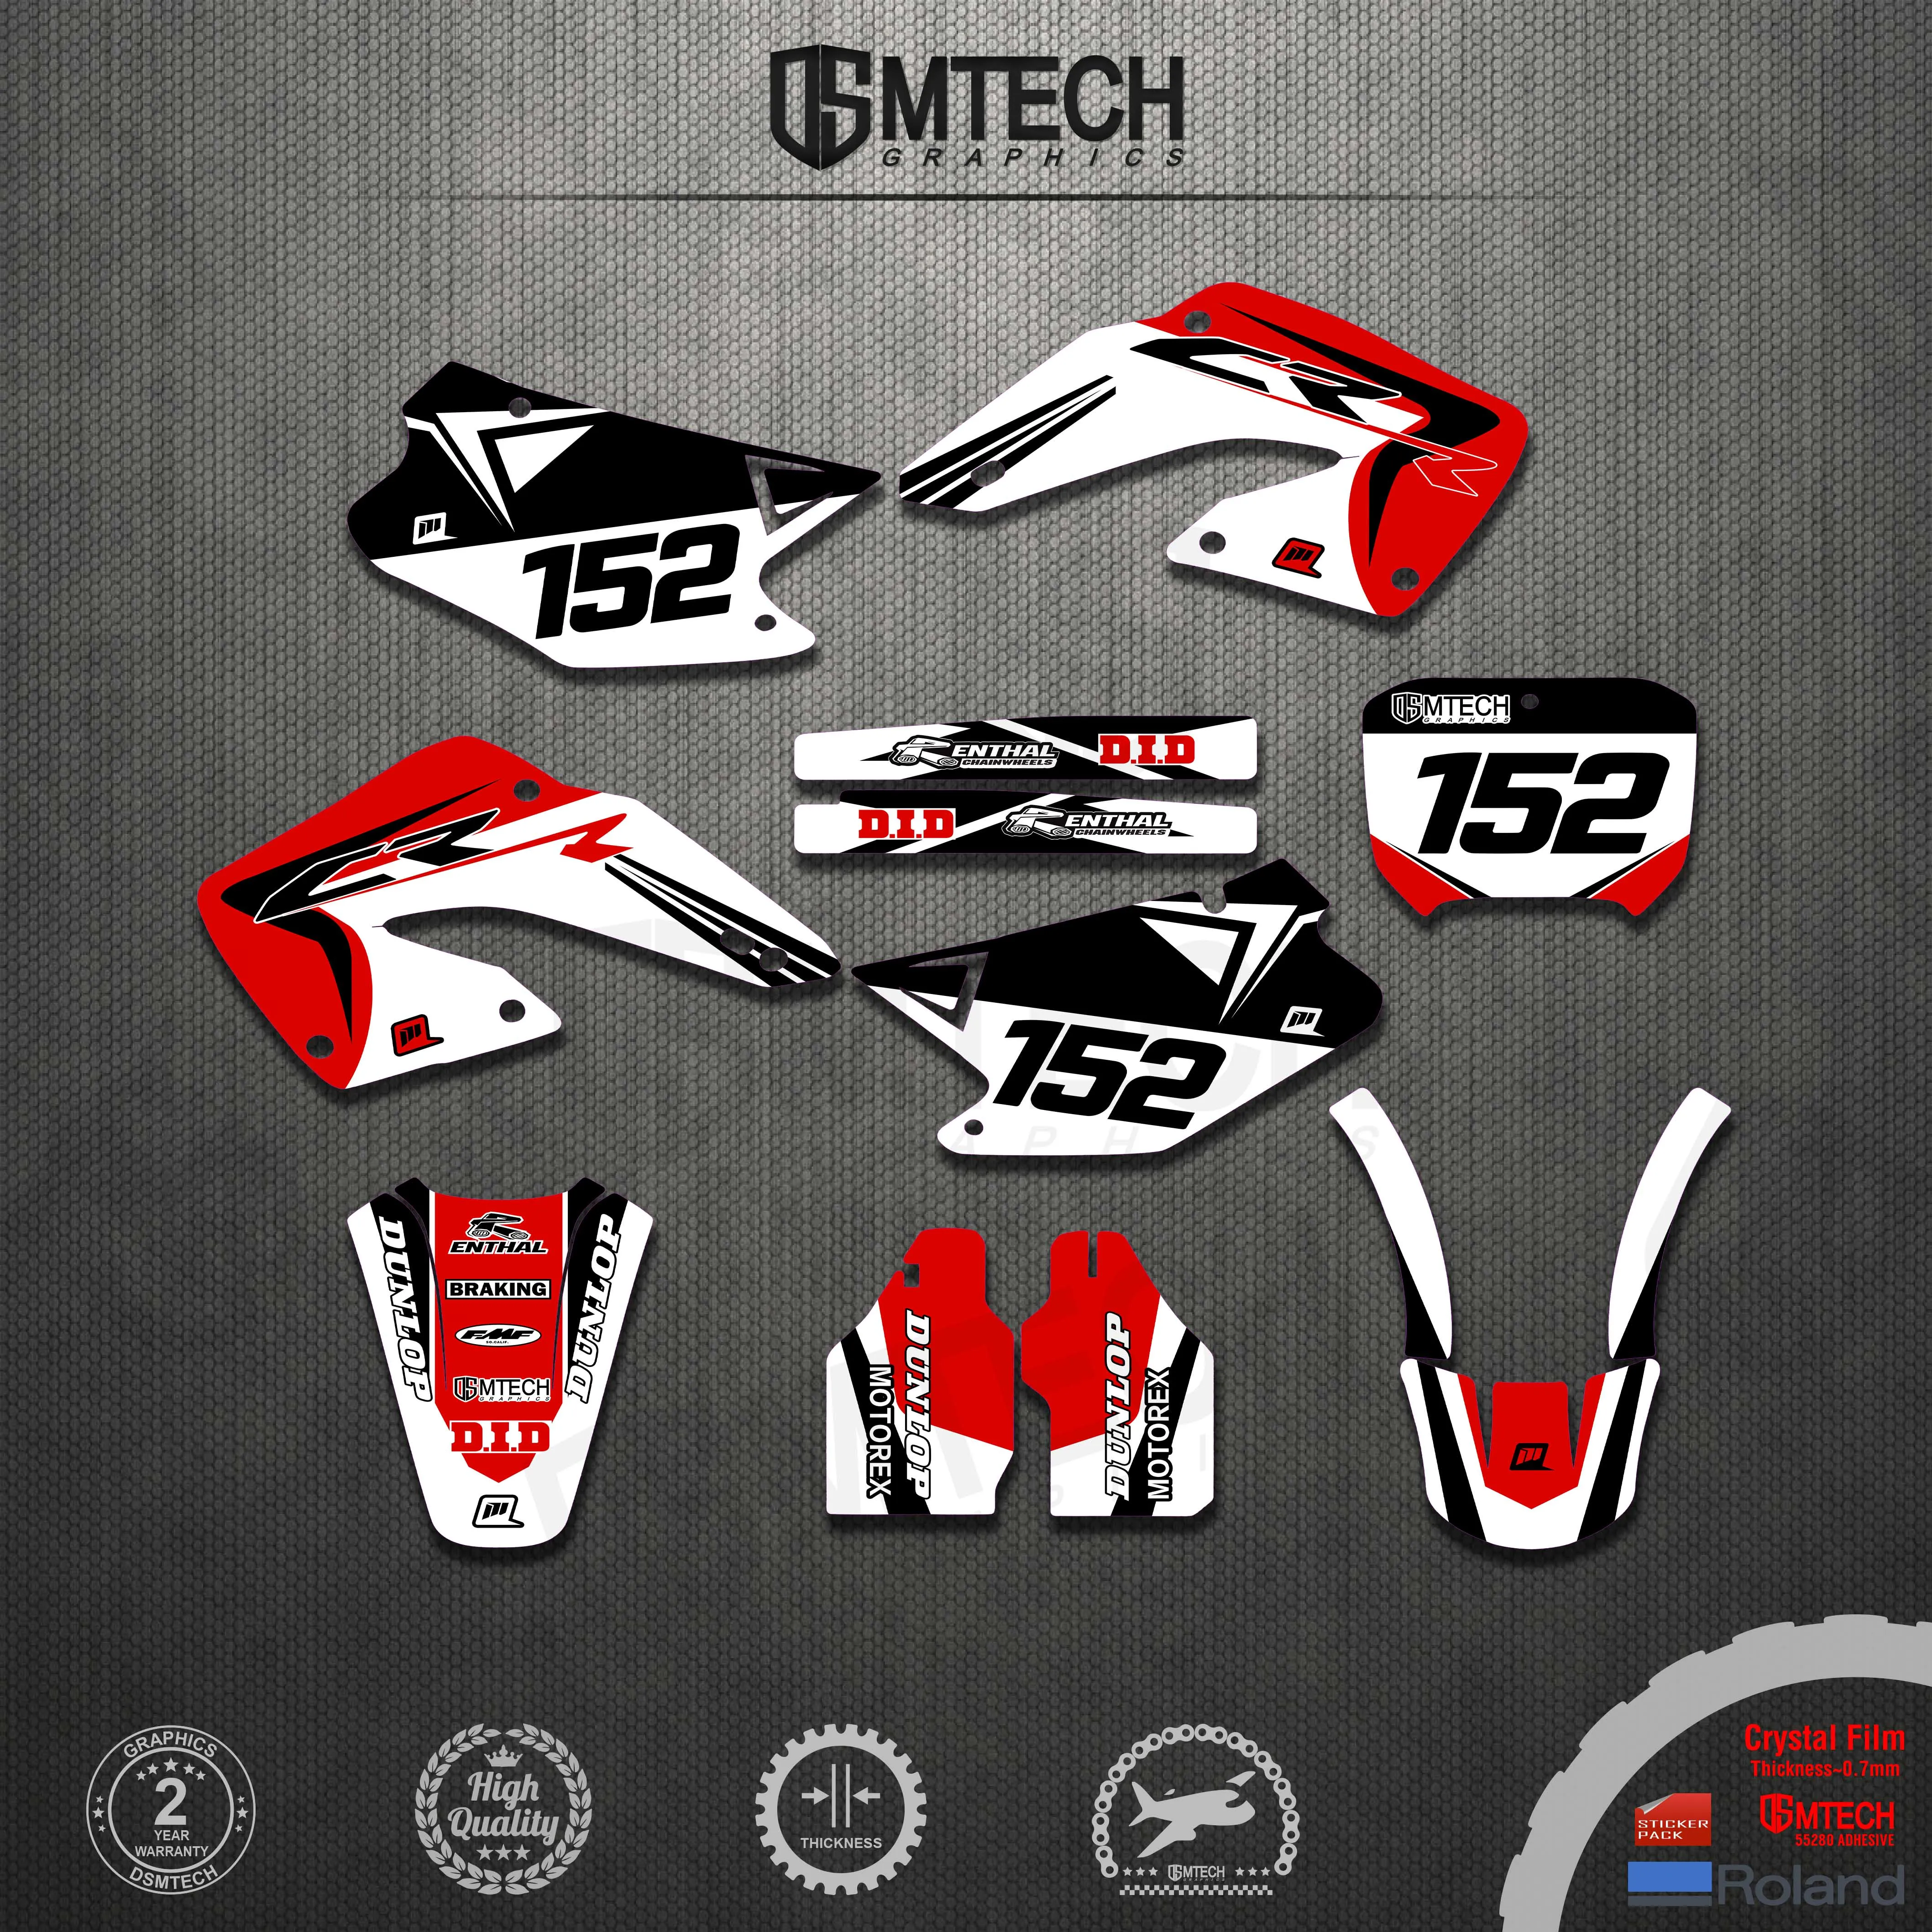 DSMTECH GRAPHICS Personalised Stickers Motorcycle Decos Kits For Honda CR250  CR125  2000 2001 125 CR 250CR CR125 CR250